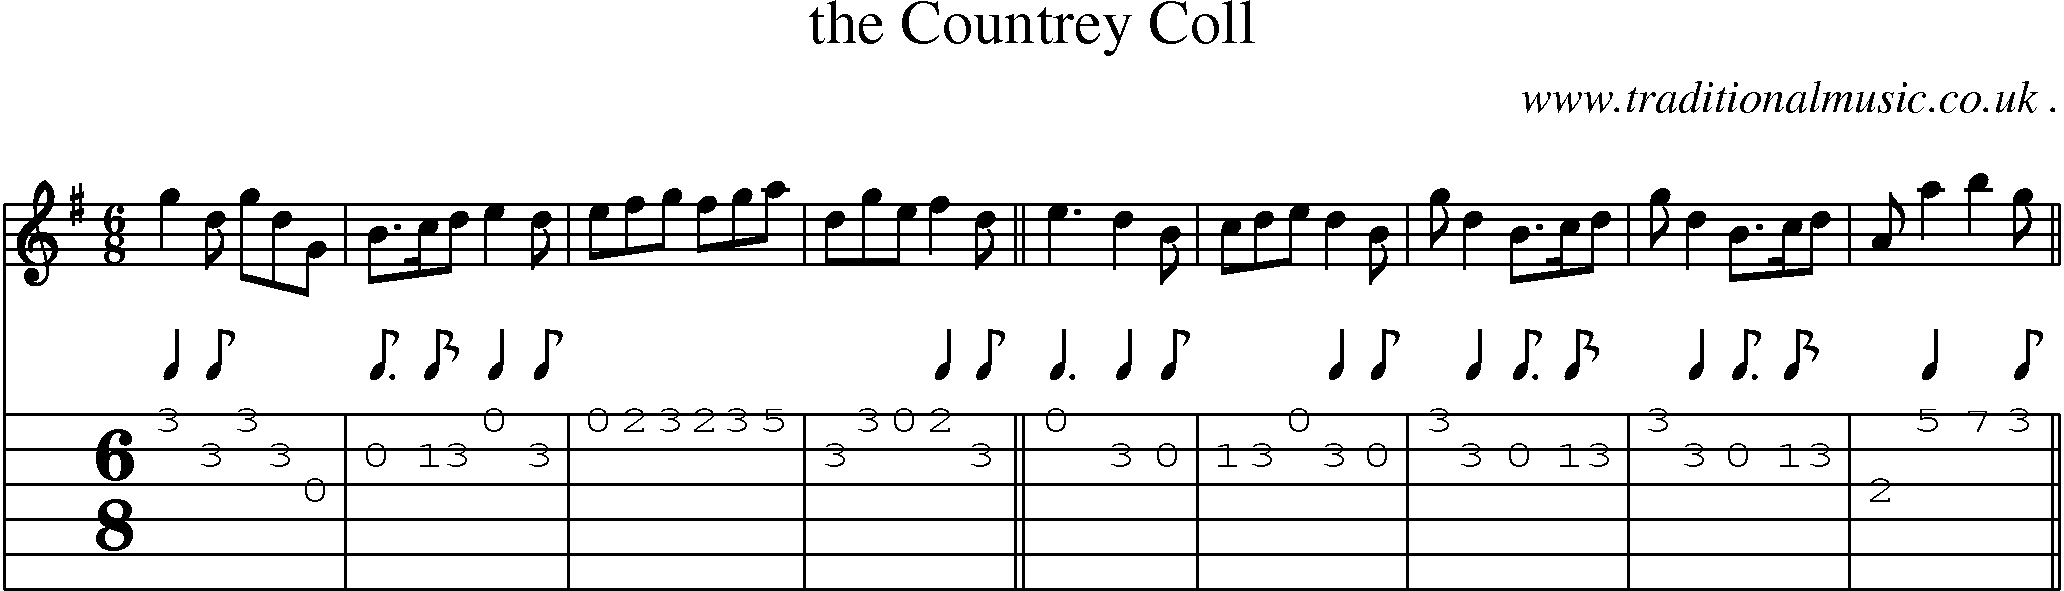 Sheet-music  score, Chords and Guitar Tabs for The Countrey Coll